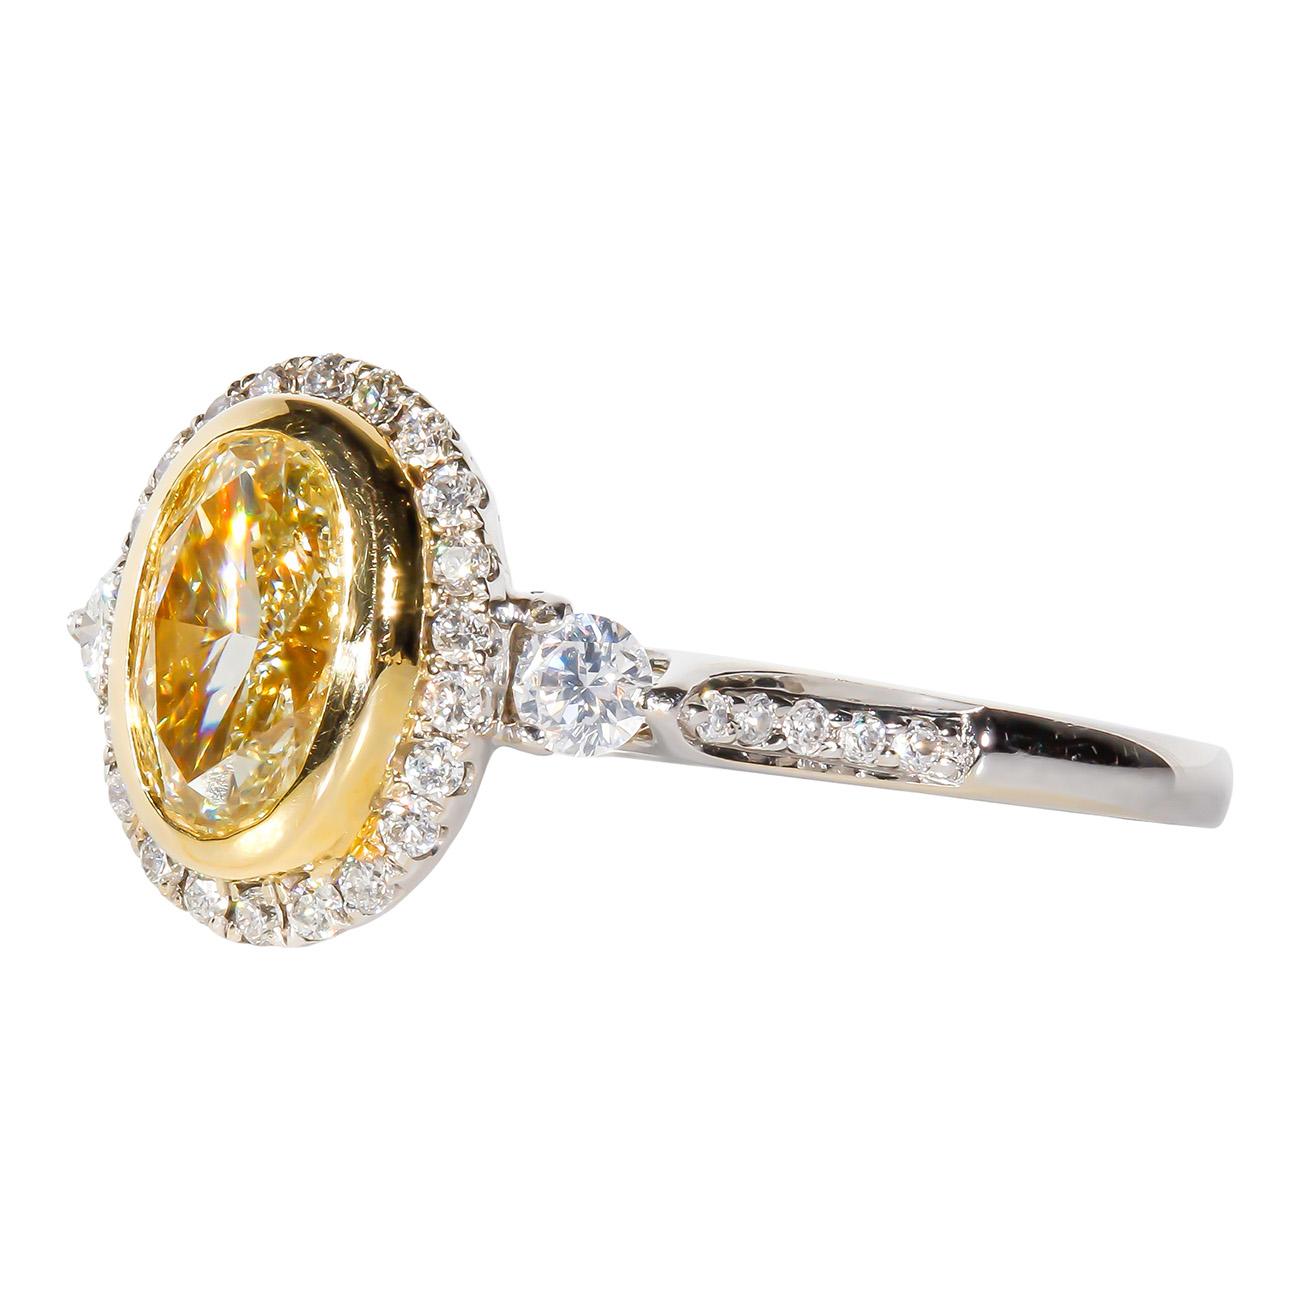 Halo Ring in 18K WG with Fancy Light Yellow Oval Diamond Center. D1.36ct.t.w. For Sale 1